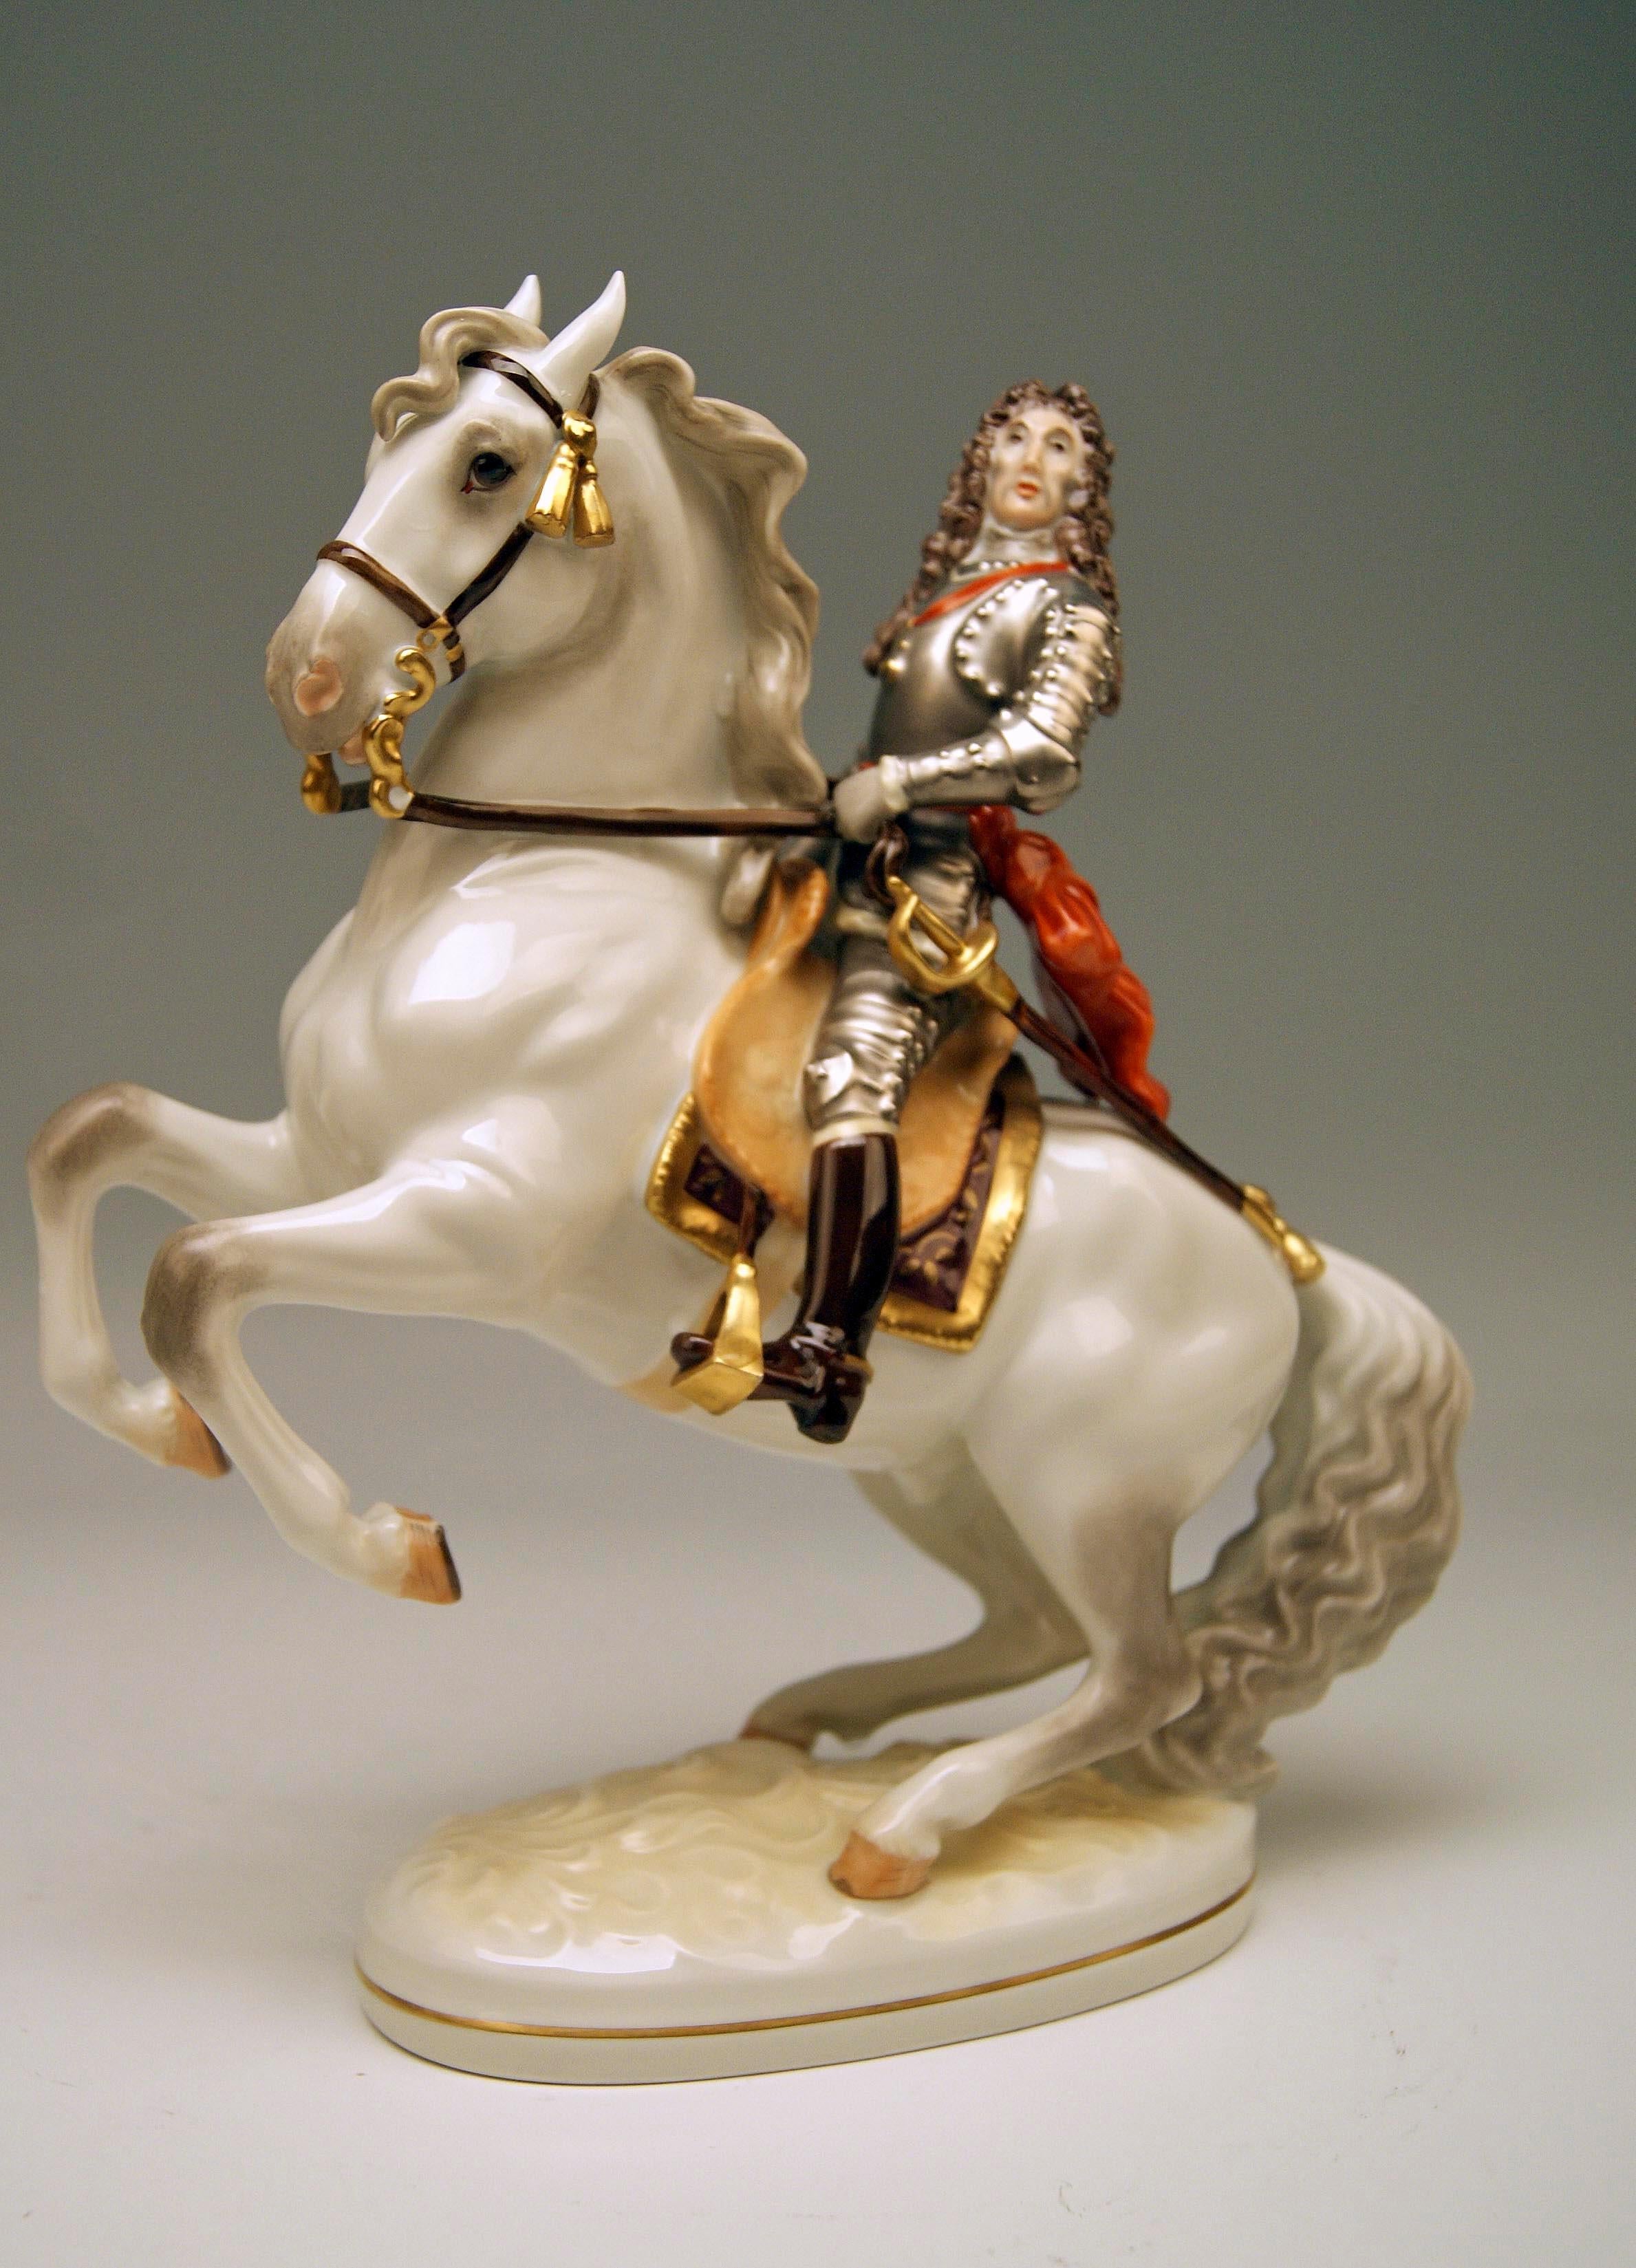 Augarten Vienna Figurine:
The Famous Viennese Commander Prince Eugene of Savoy on Horse
He is shown in his armour and is wearing a typical Baroque long-haired wig. In his right hand he is holding the sign of the General Field Marshal. The horse is